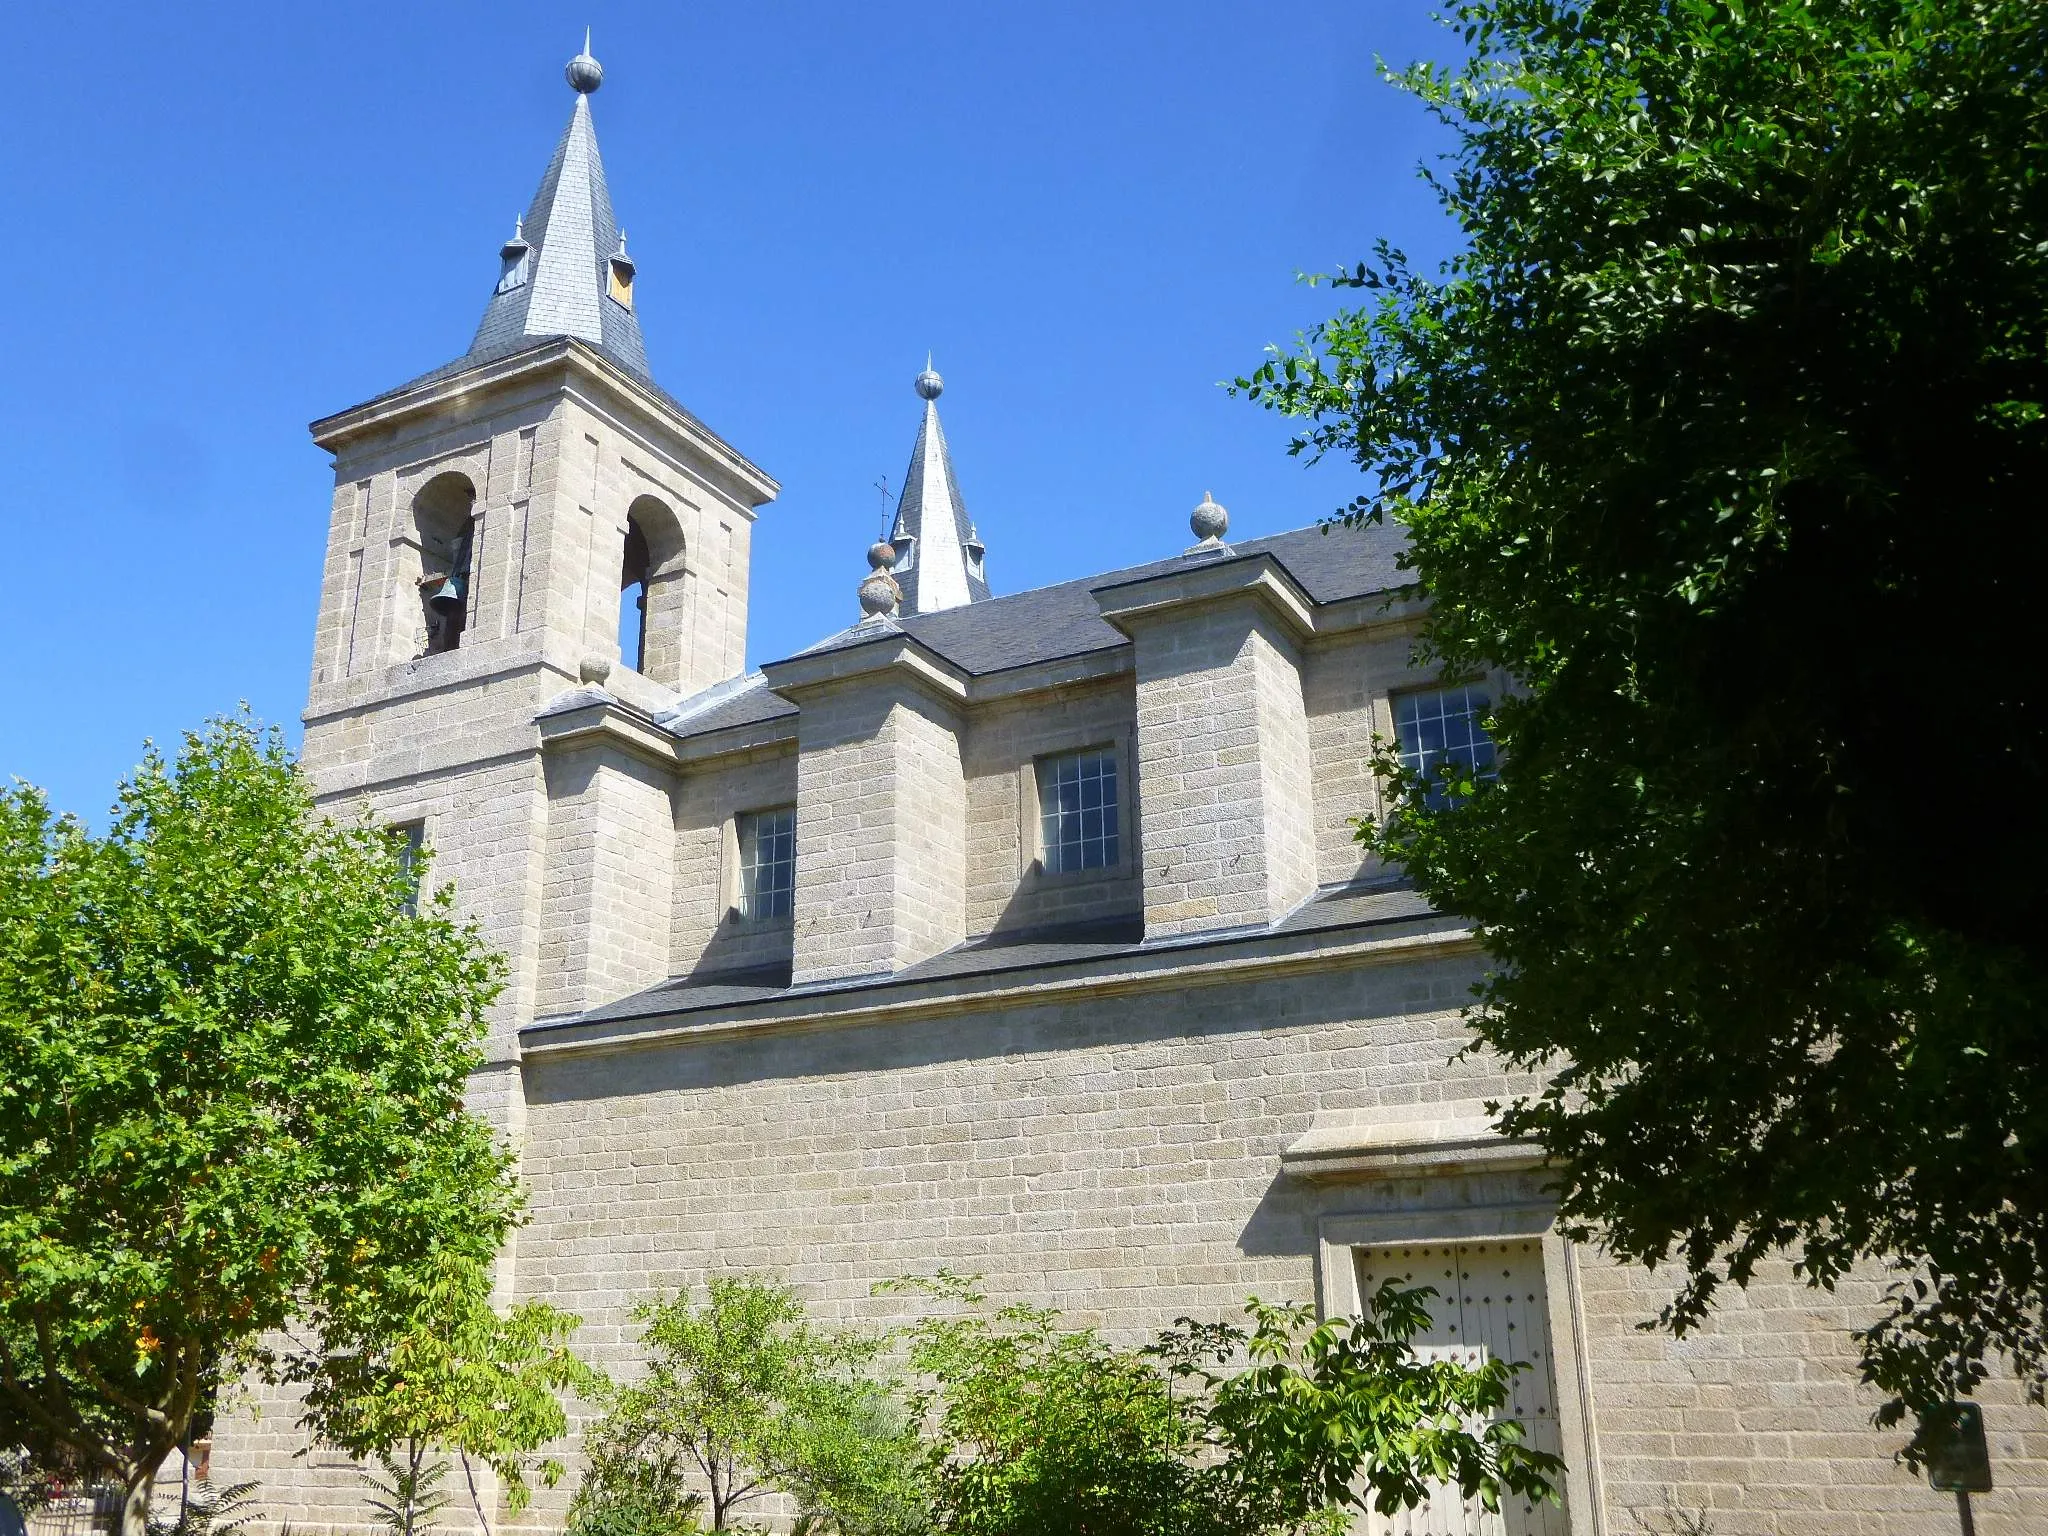 Both the pastor of nearby San Bernabé parish in El Escorial, Fr. Florentino de Andrés, along with the Archdiocese of Madrid, are considering the deconsecration of the chapel as a result of the ceremony.?w=200&h=150